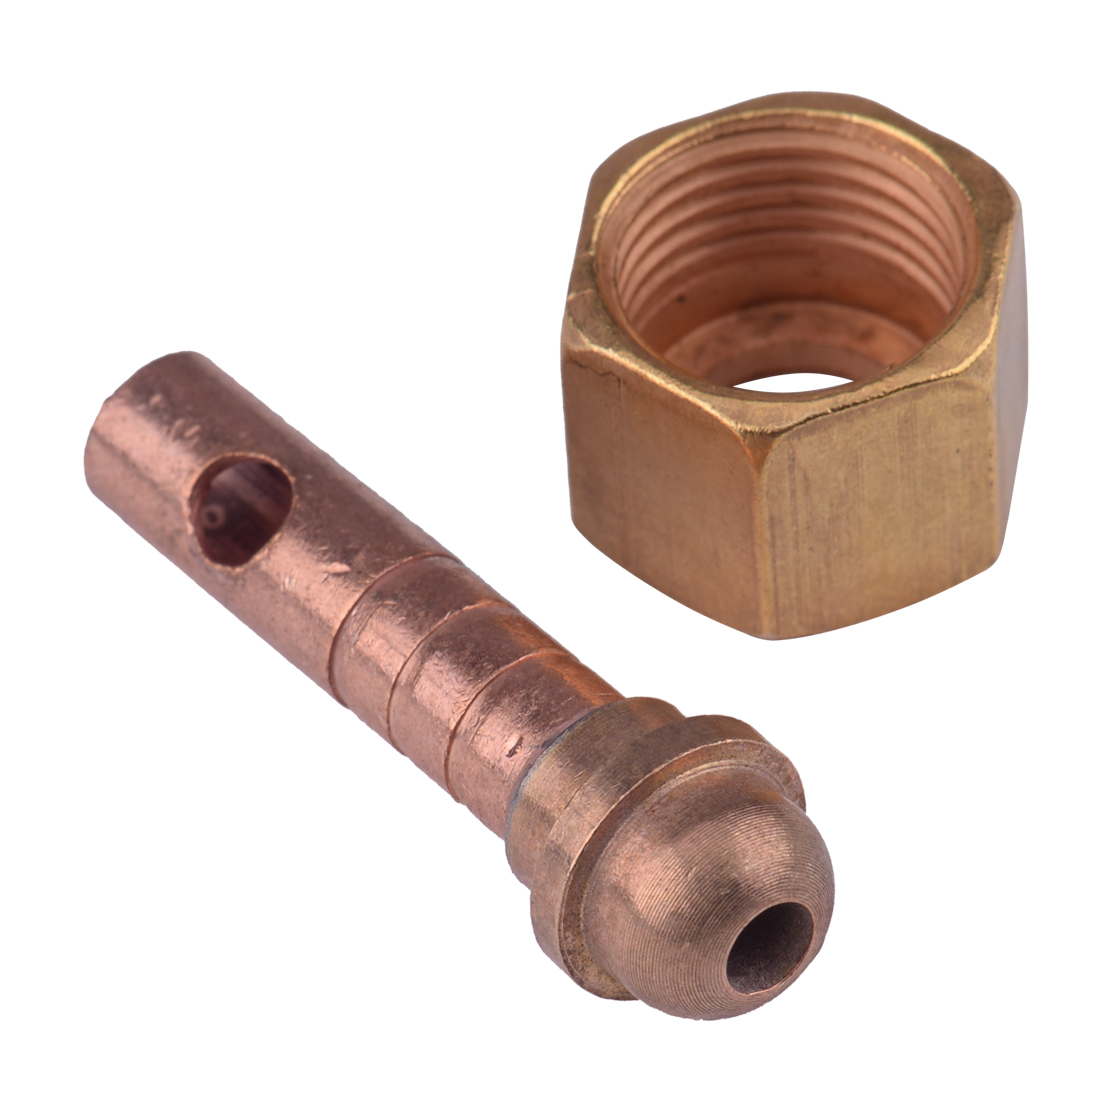 LETAOSK M16x1.5 TIG Copper Welding Plasma Cutting Torch Cable Connector Gas Electric WP-25 WP-24W WP-20 WP-20F WP-20V WP-24WF